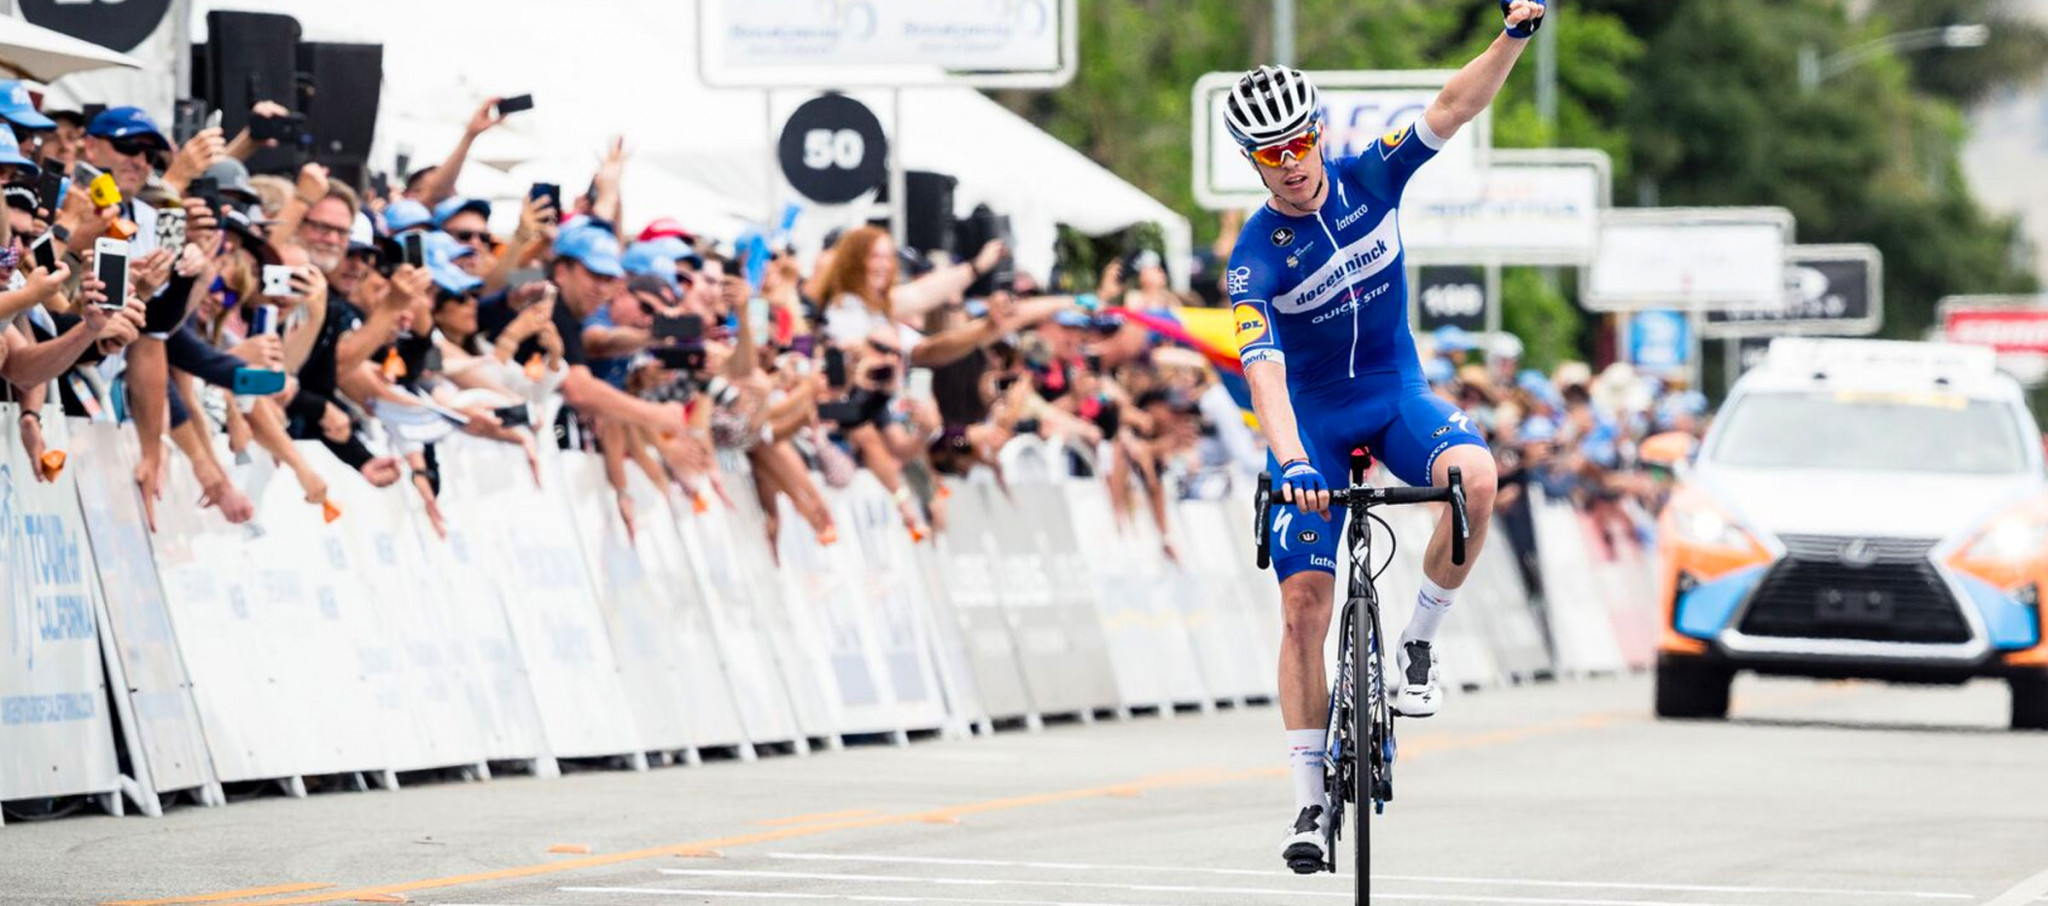 France’s Remi Cavagna won stage three of the Tour of California after riding solo for 75 kilometres ©Tour of California